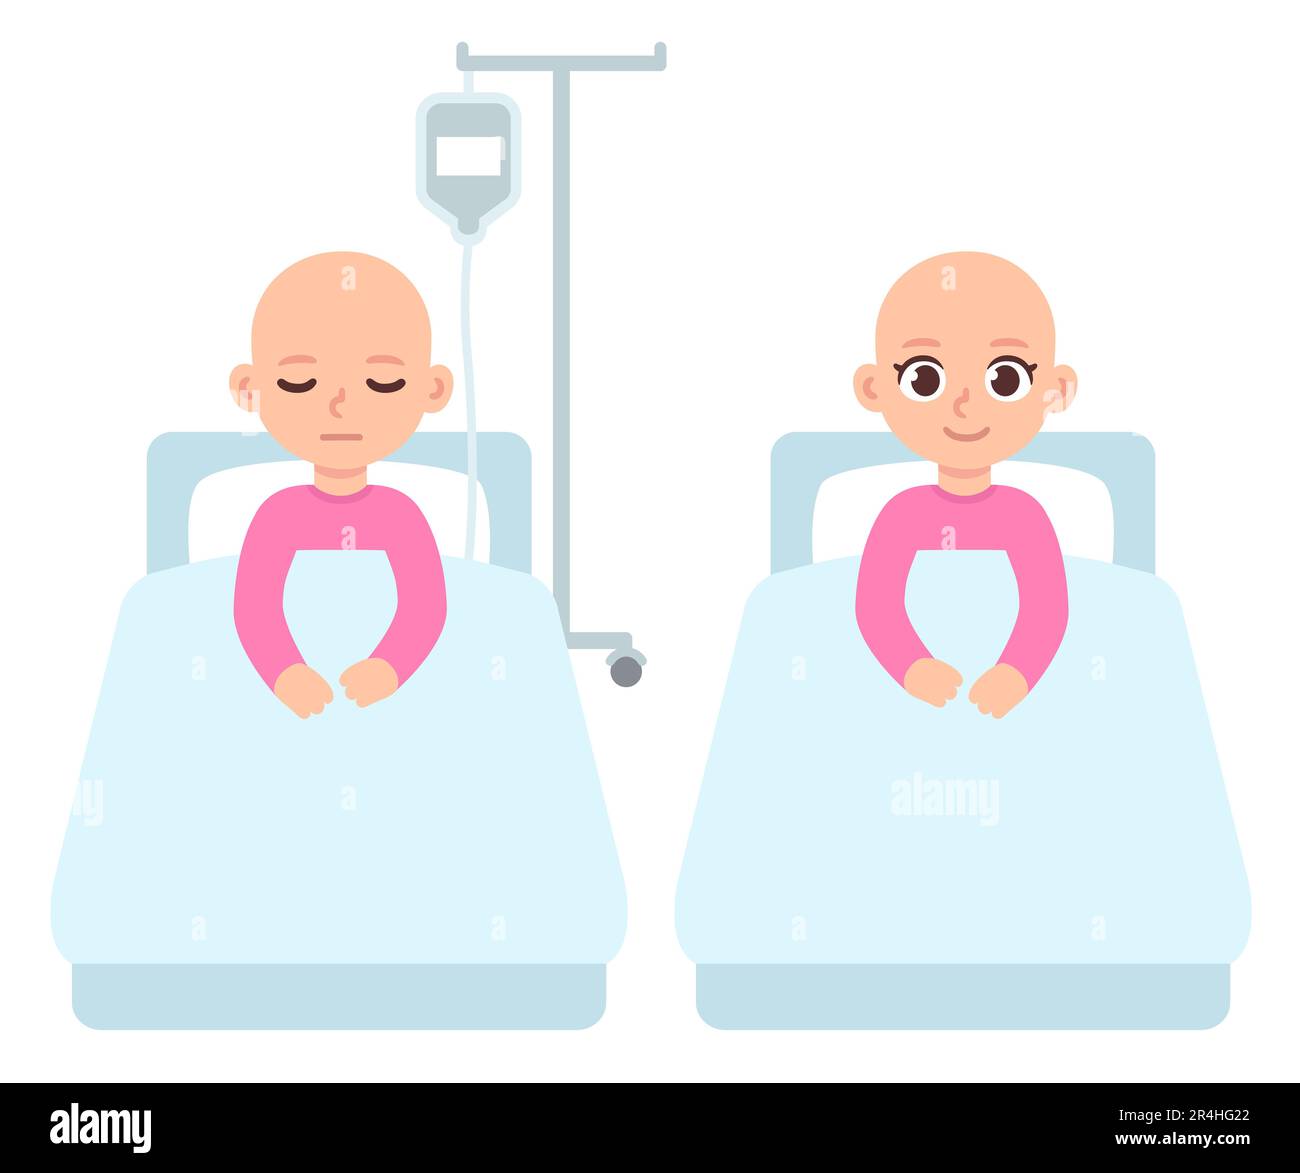 Child with cancer, little girl in hospital bed receiving IV chemotherapy treatment. Cute cartoon illustration in flat vector style. Stock Vector